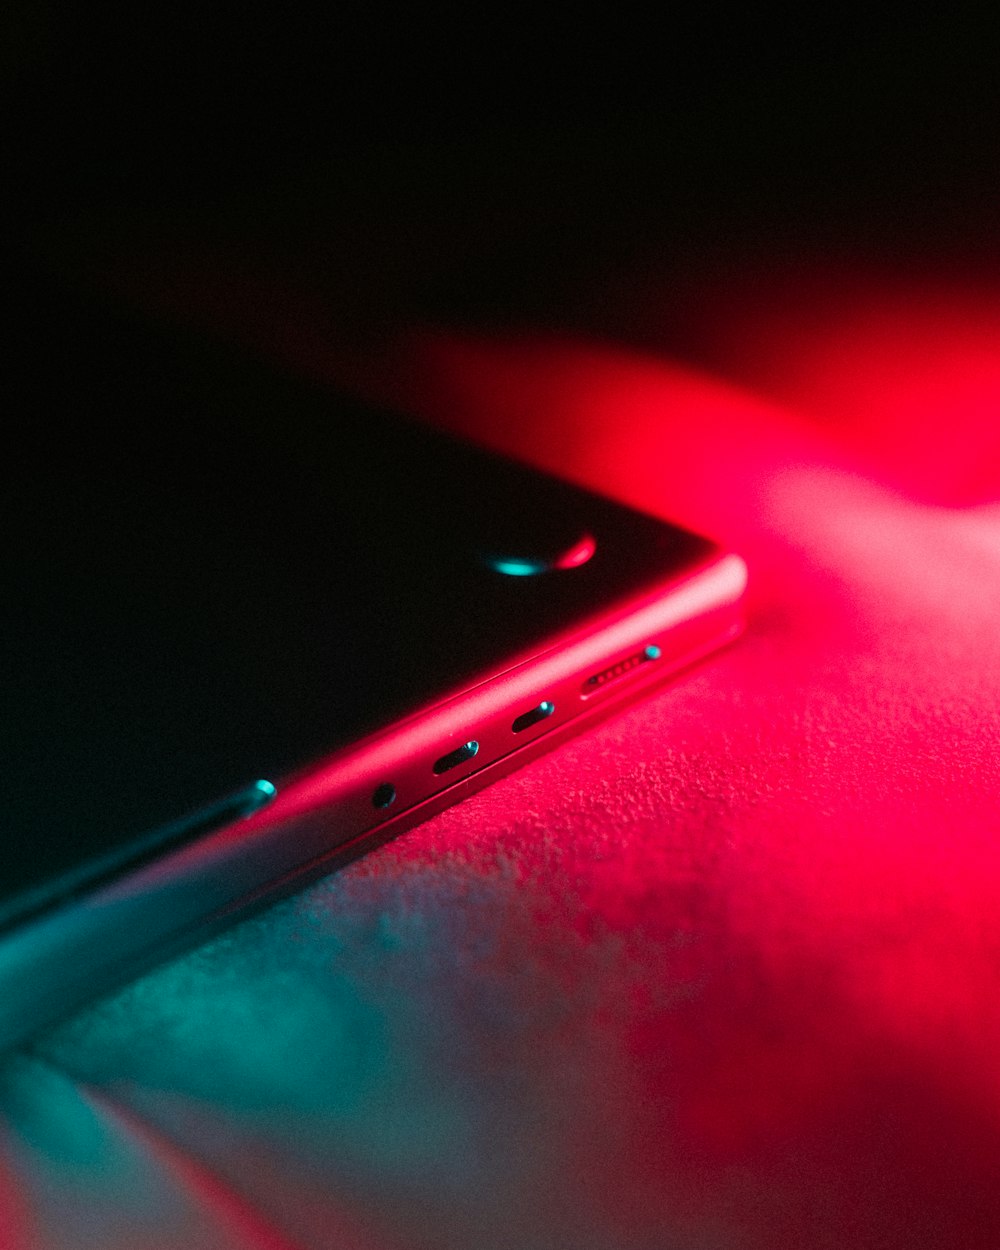 a close up of a cell phone on a table